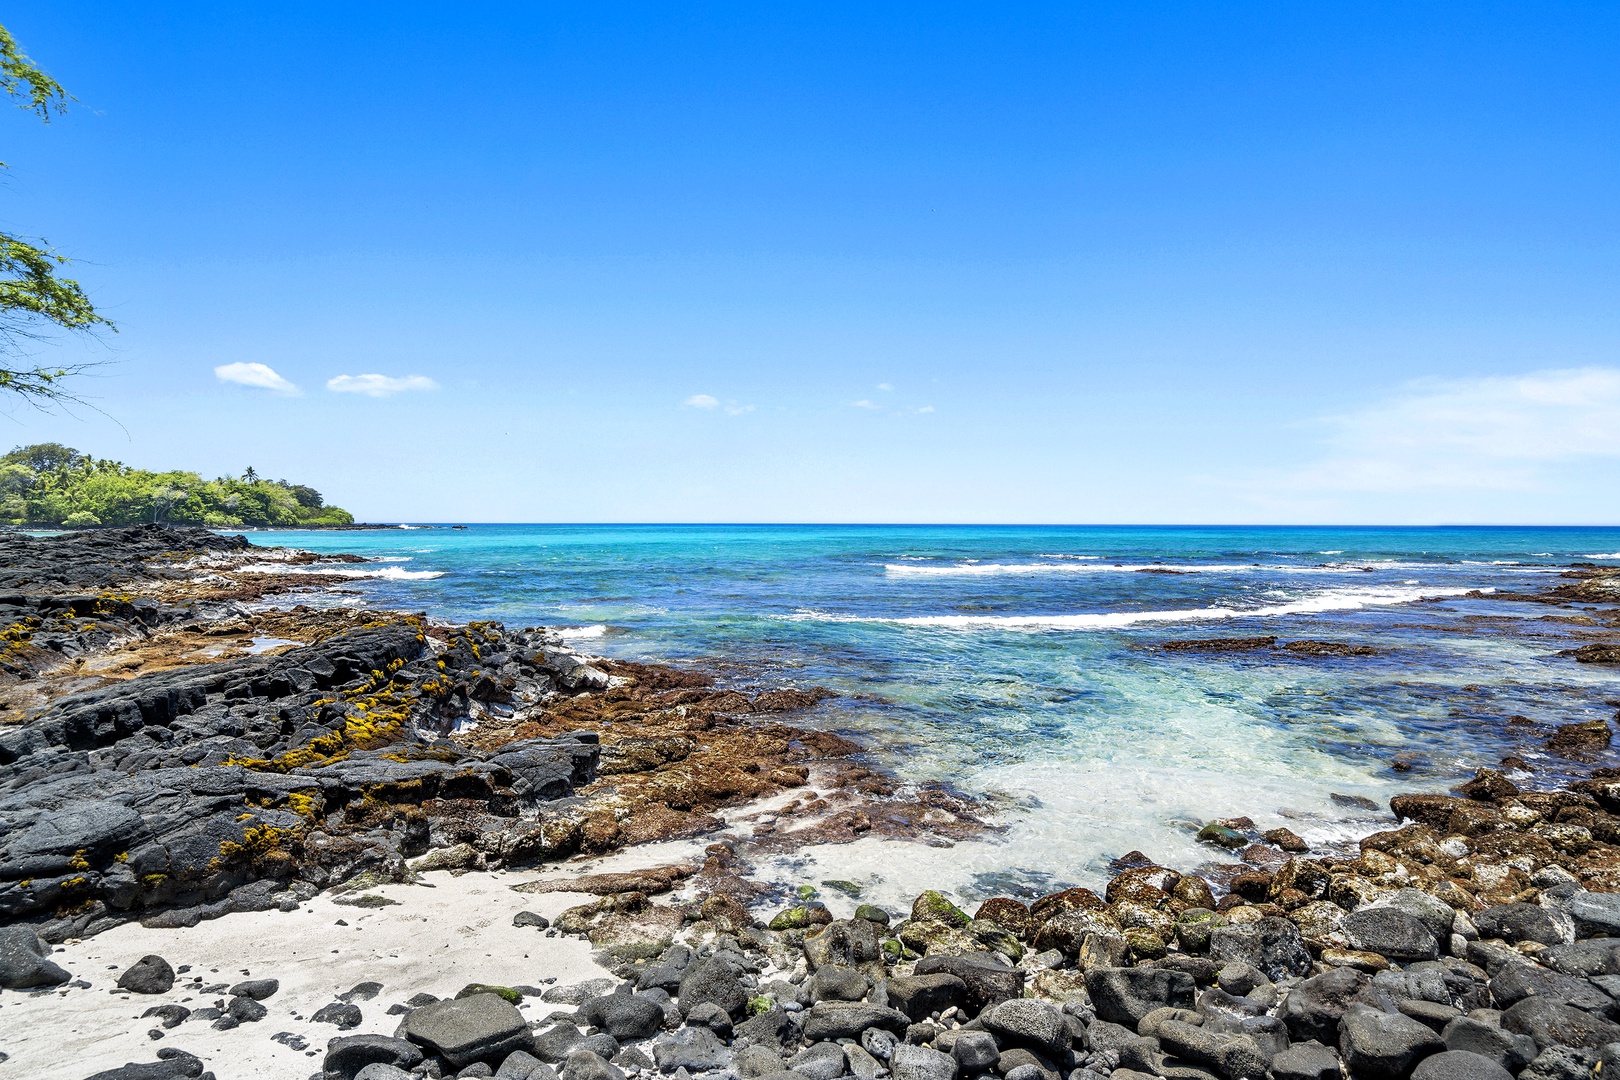 Kailua Kona Vacation Rentals, Kona's Shangri La - Lymans is a well known and popular surf spot for those ocean enthusiasts out there!